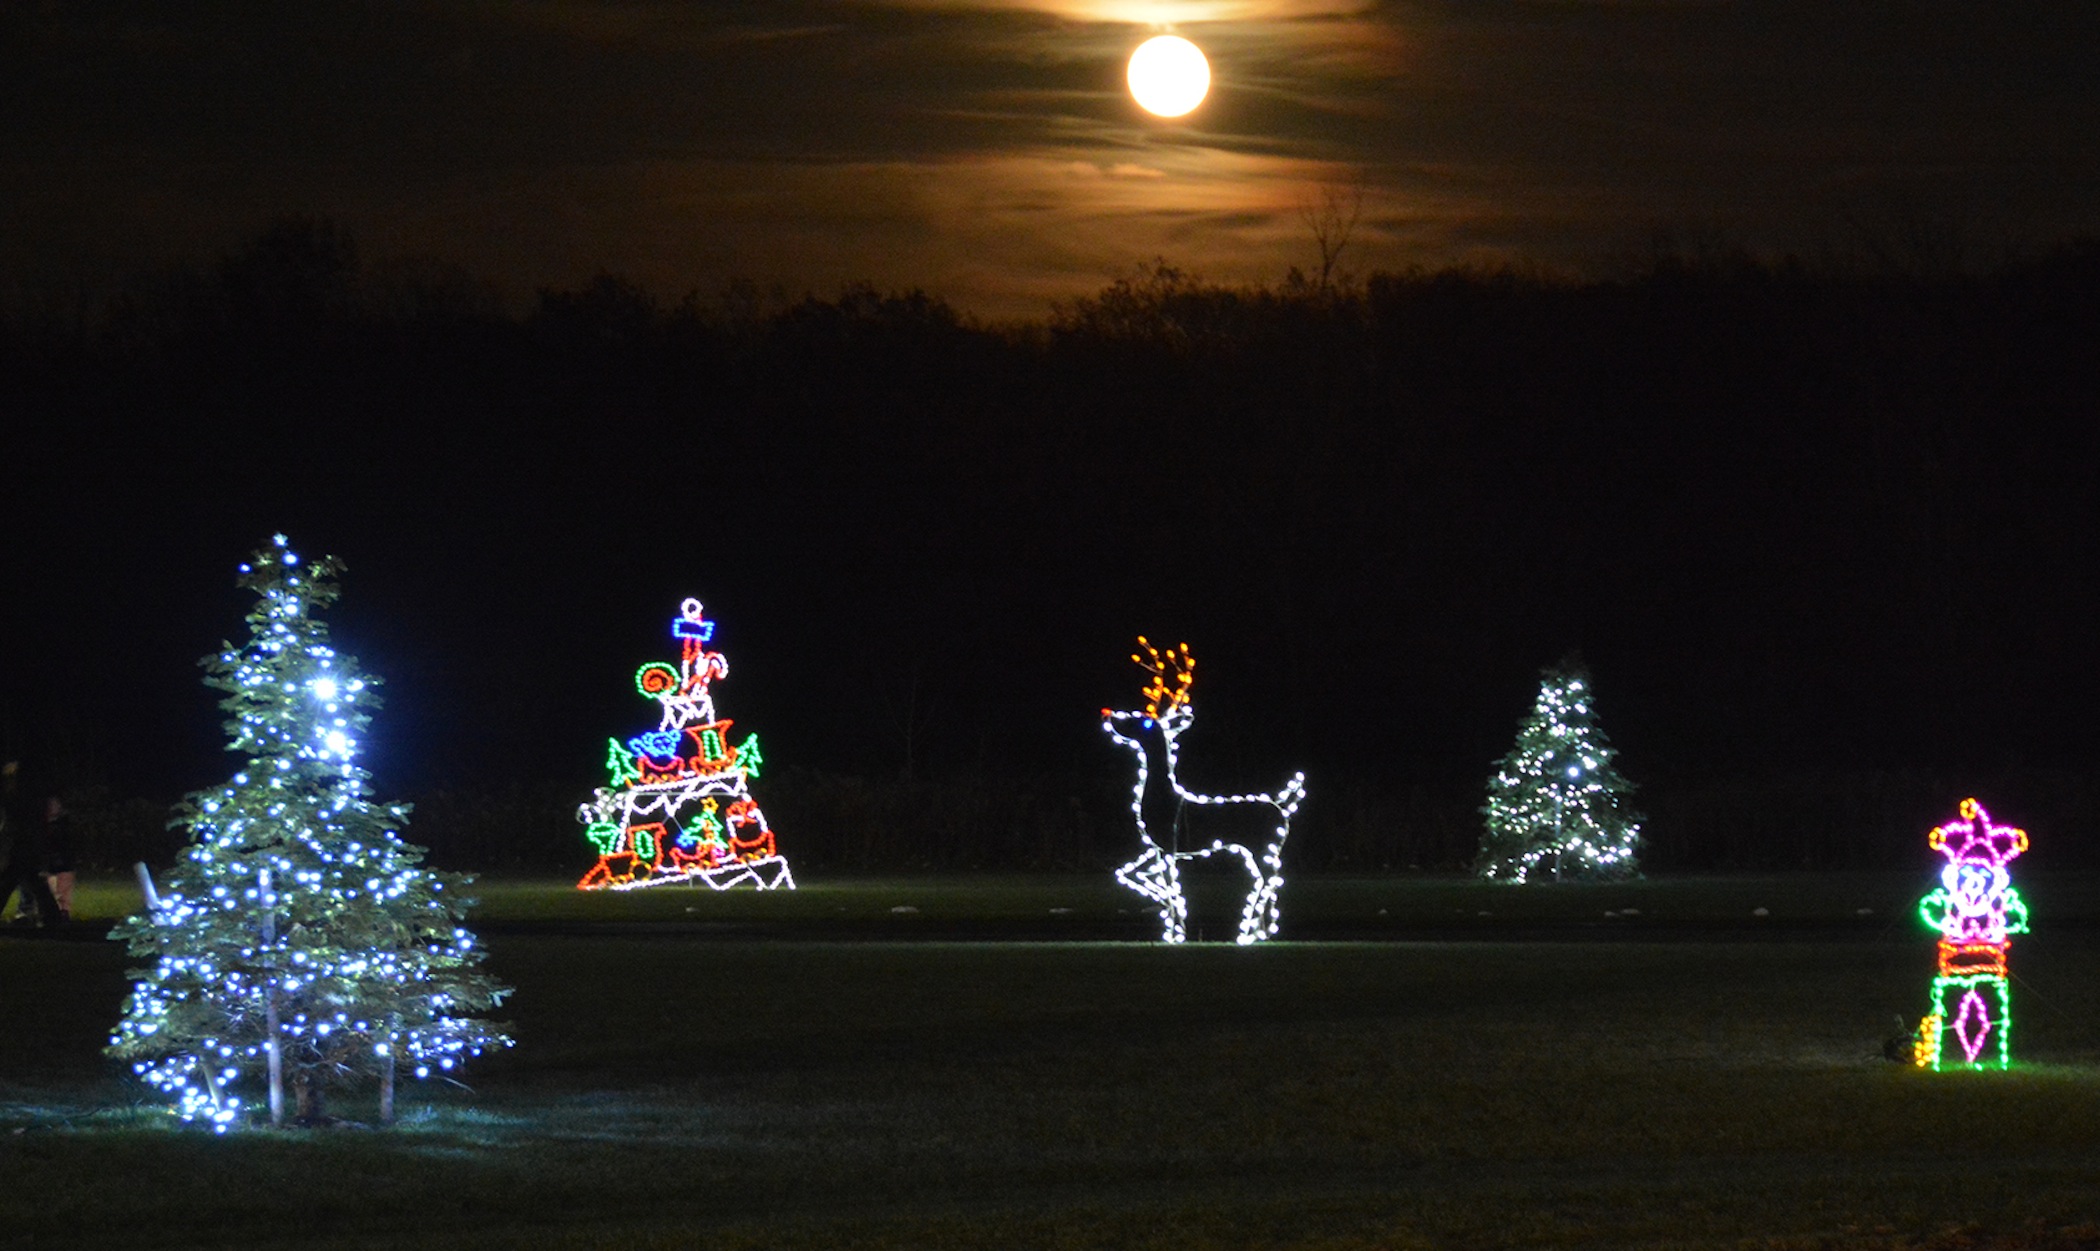 Pictured are scenes from last Friday's `Noel at Niagara` park lighting ceremony. (Photos by David Yarger and Marc Carpenter)